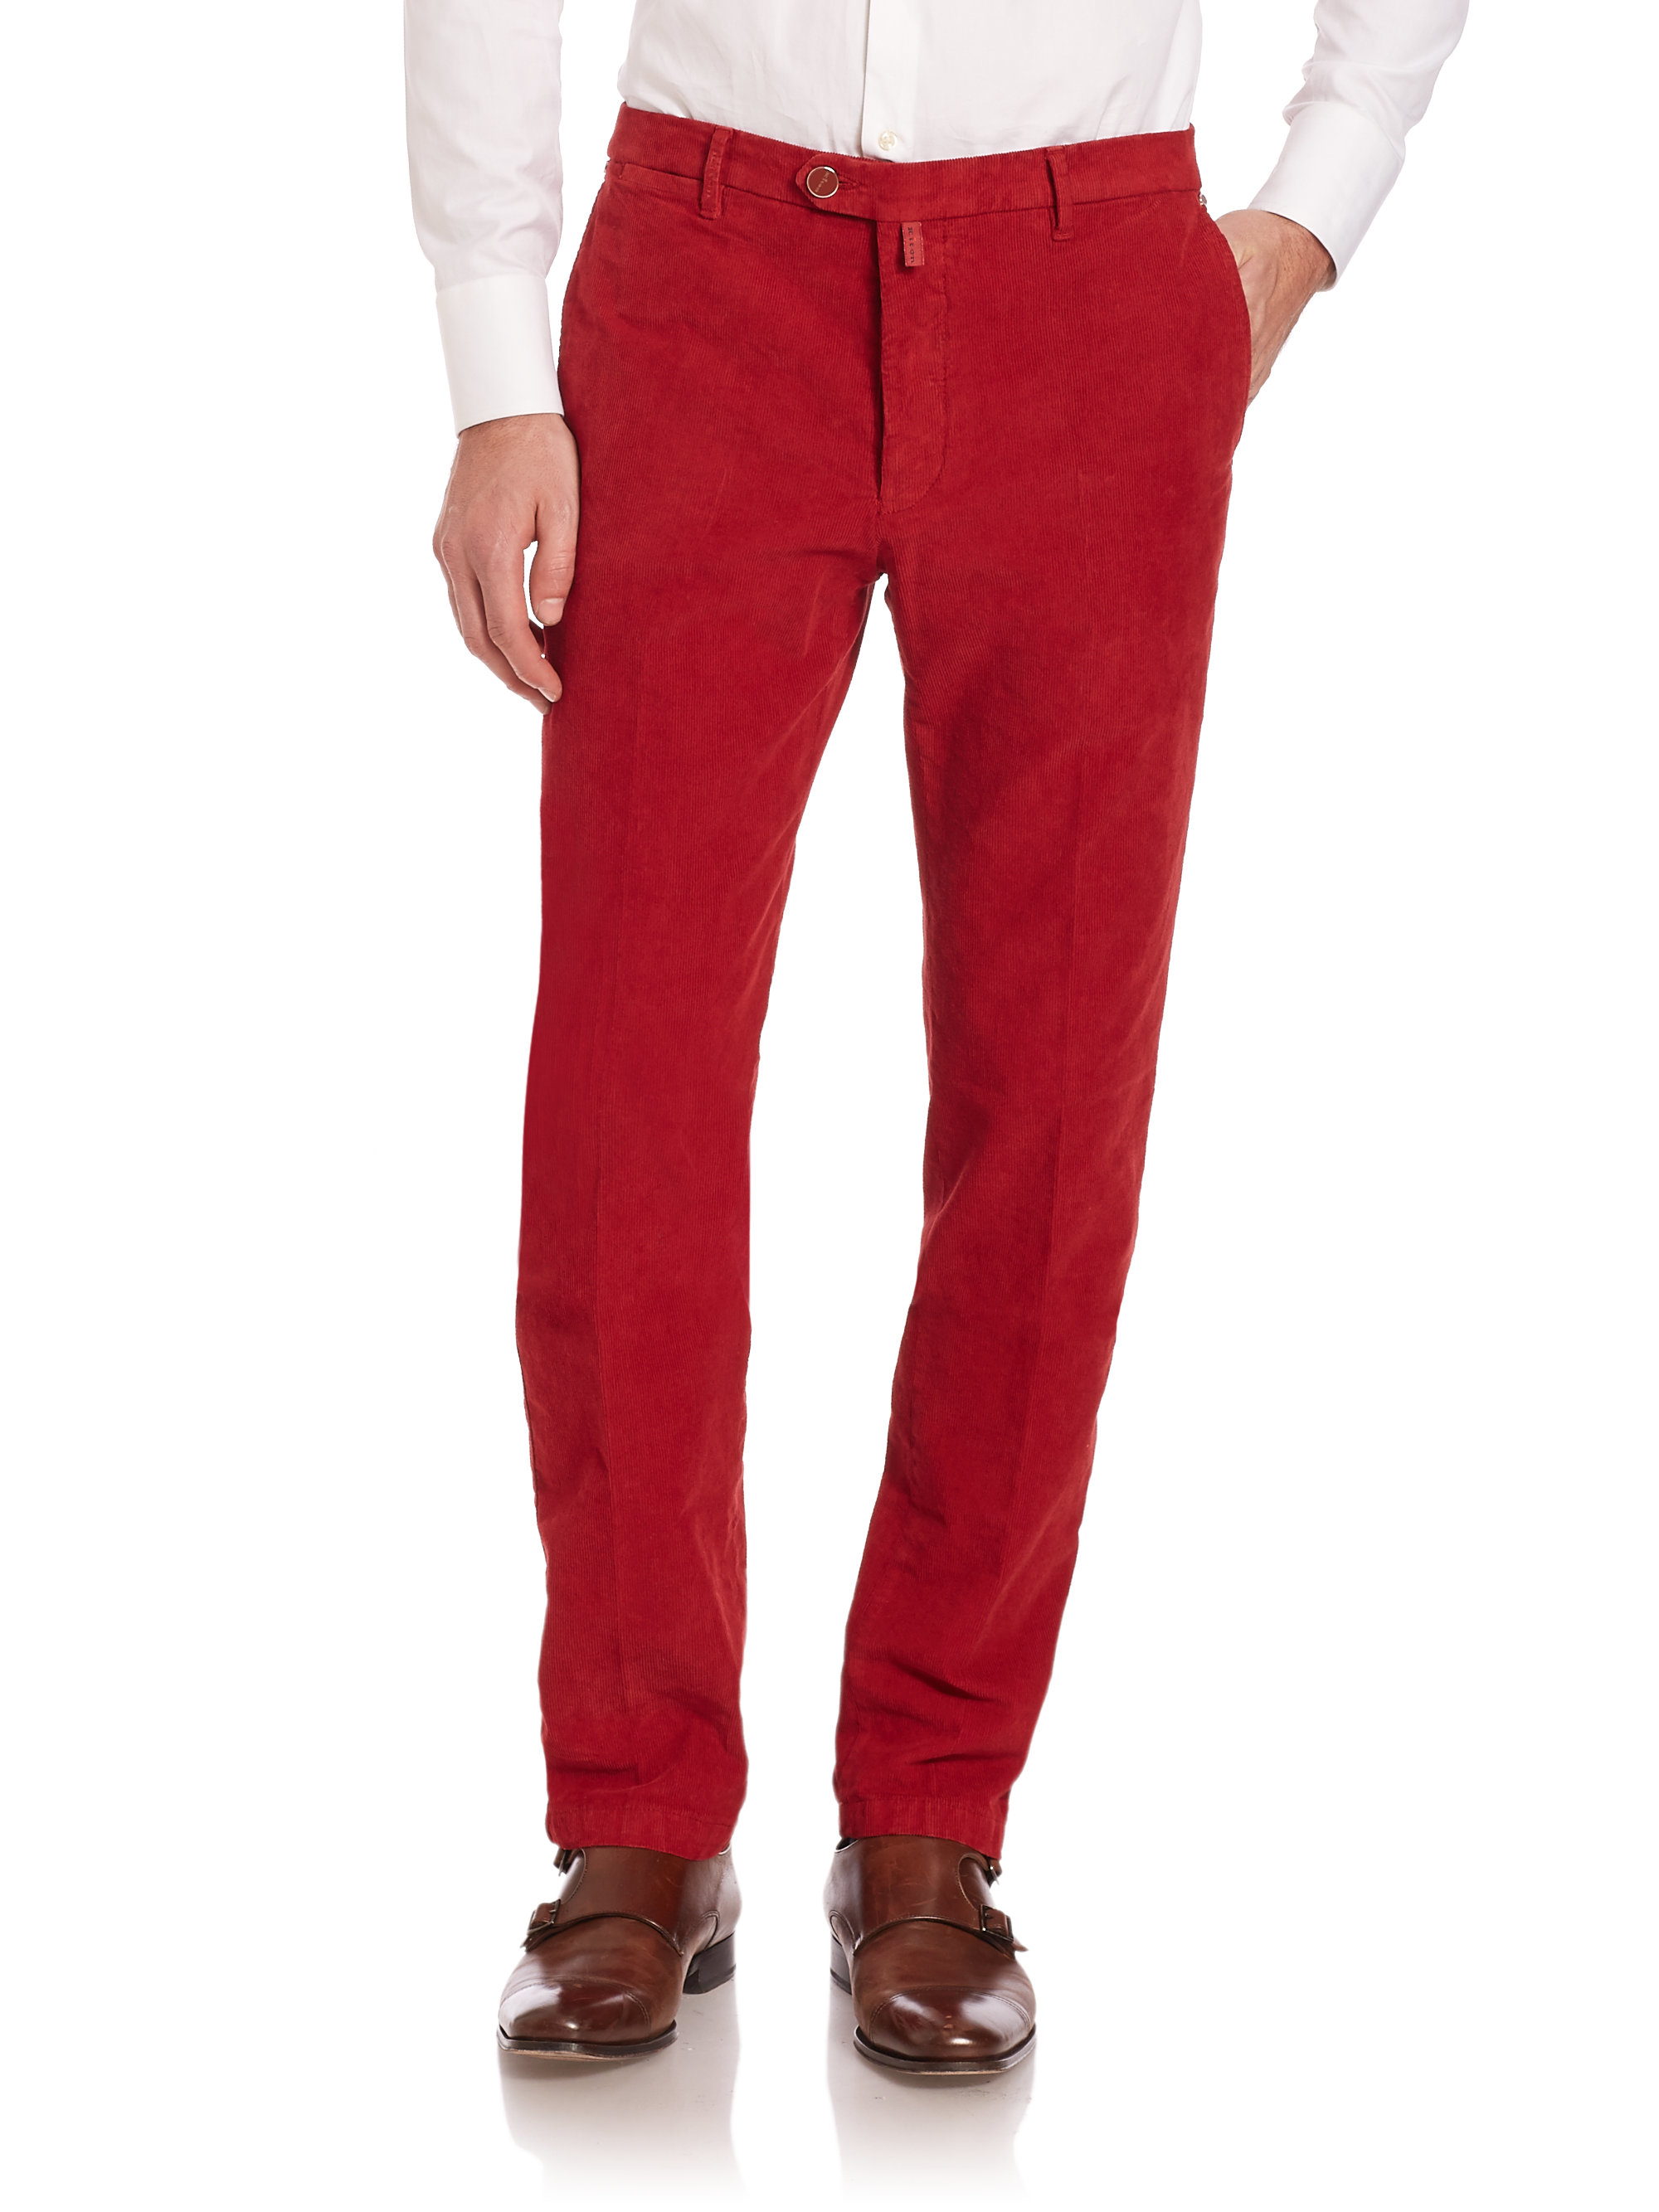 Lyst - Kiton Corduroy Pants in Red for Men